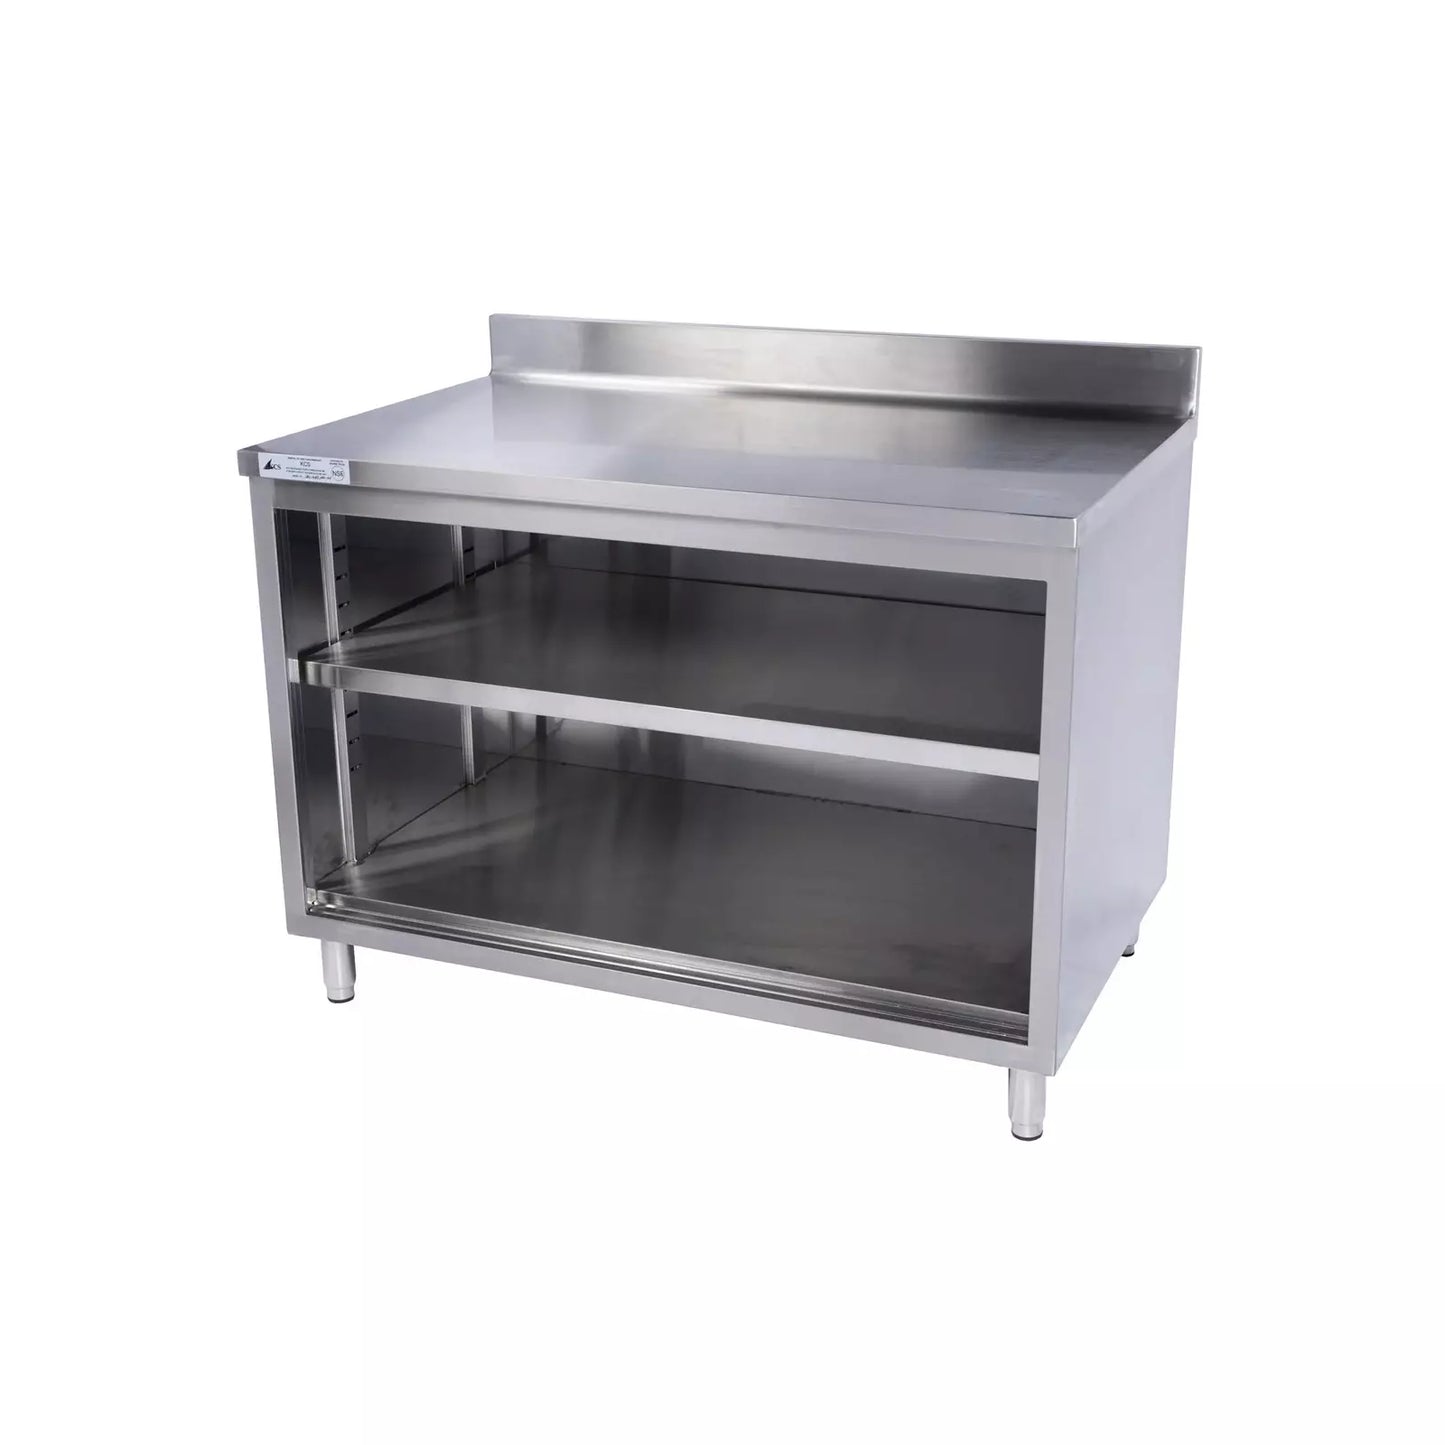 KCS CBS-2448-4BSWO 24" x 48" Stainless Steel Storage Welded Cabinet Open Front with 4" Backsplash